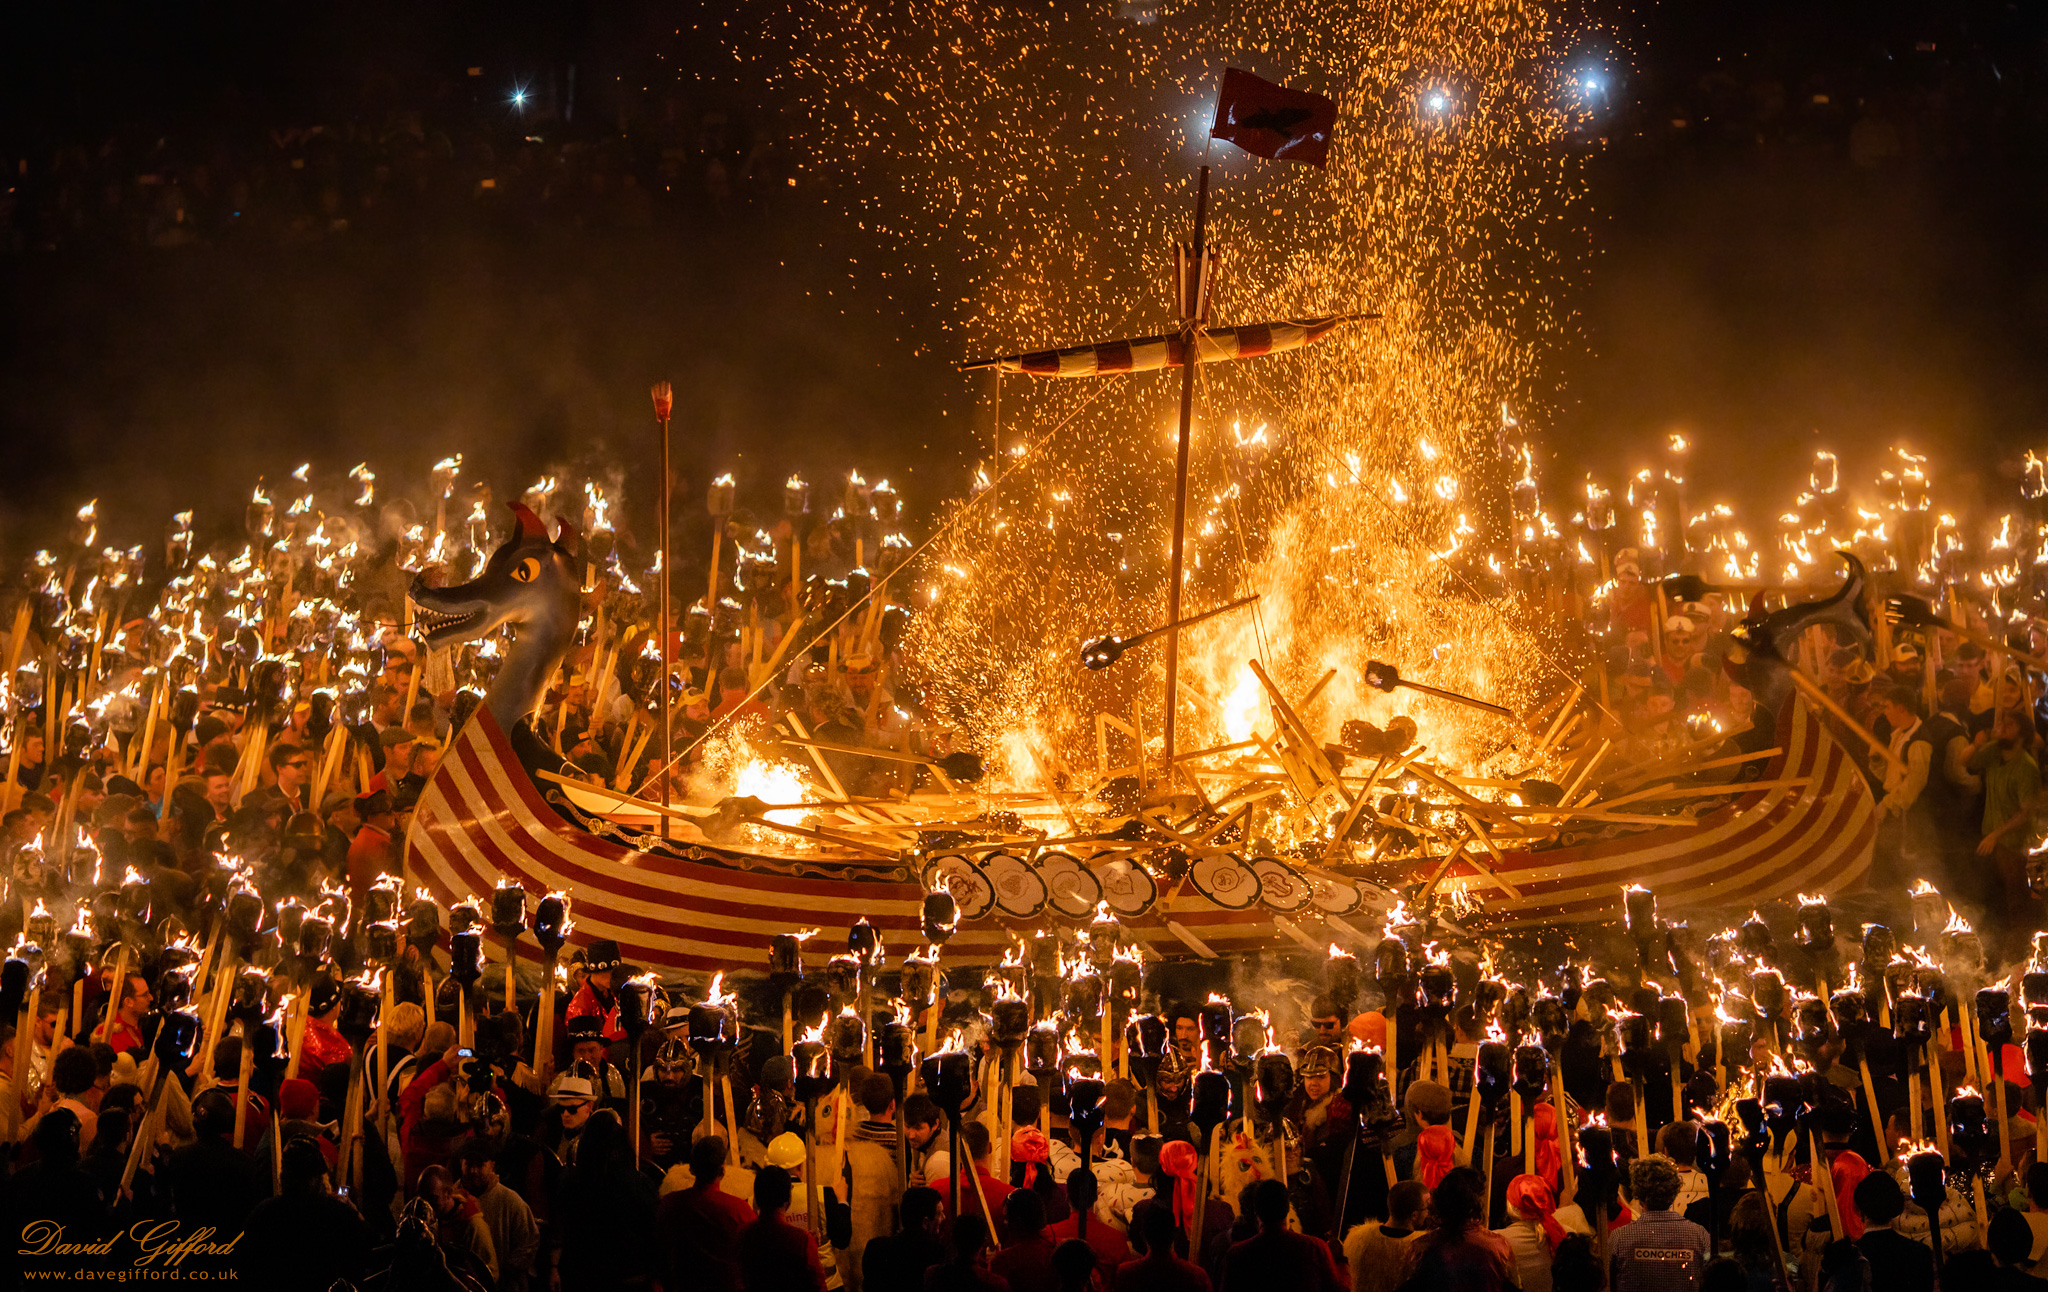 Photo: Up Helly Aa 2020: Throwing in the Torches